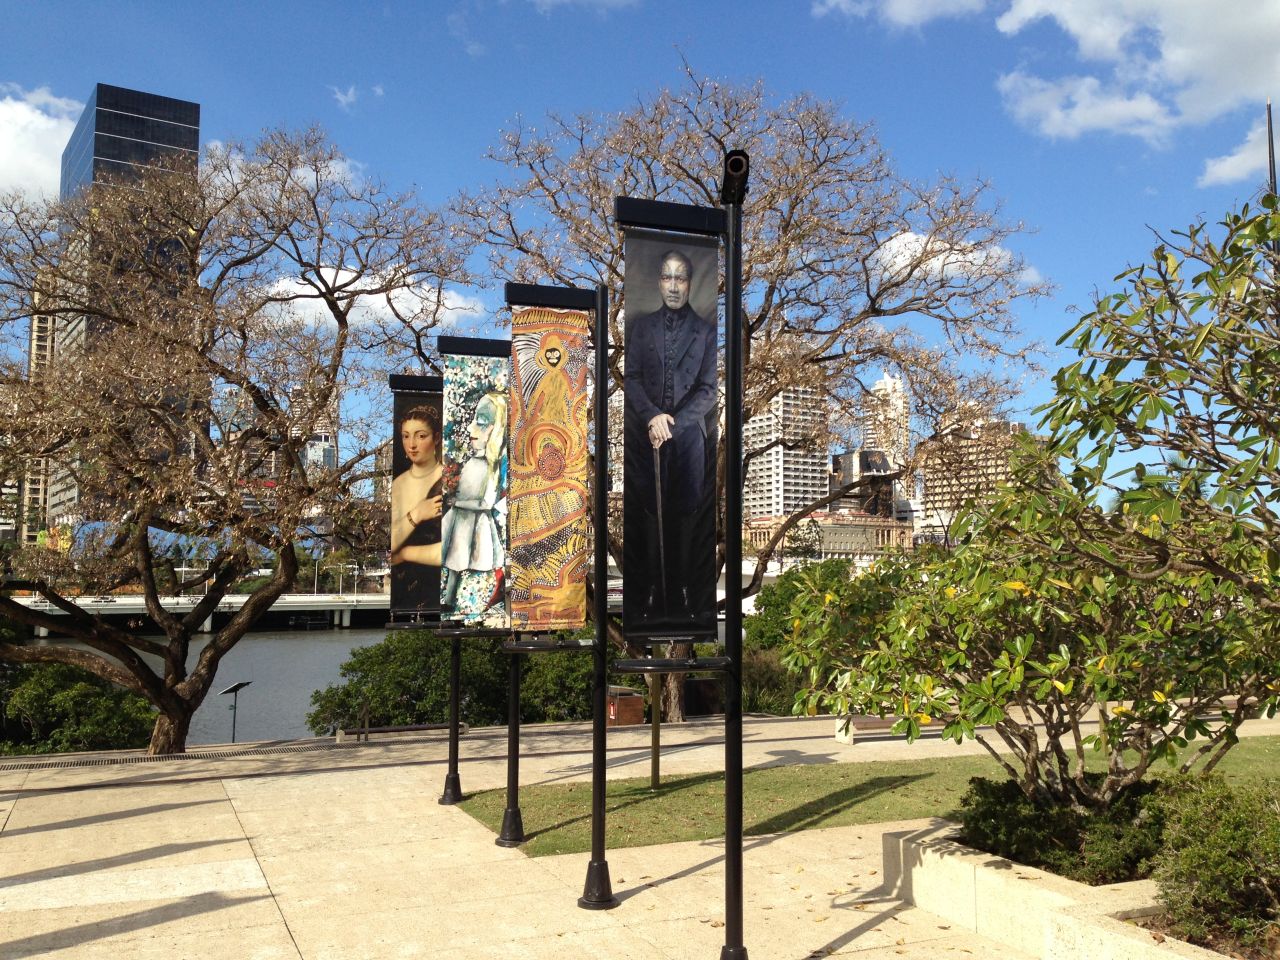 Part of the Queensland Cultural Centre, Queensland Art Gallery features a collection of Australian and international art.